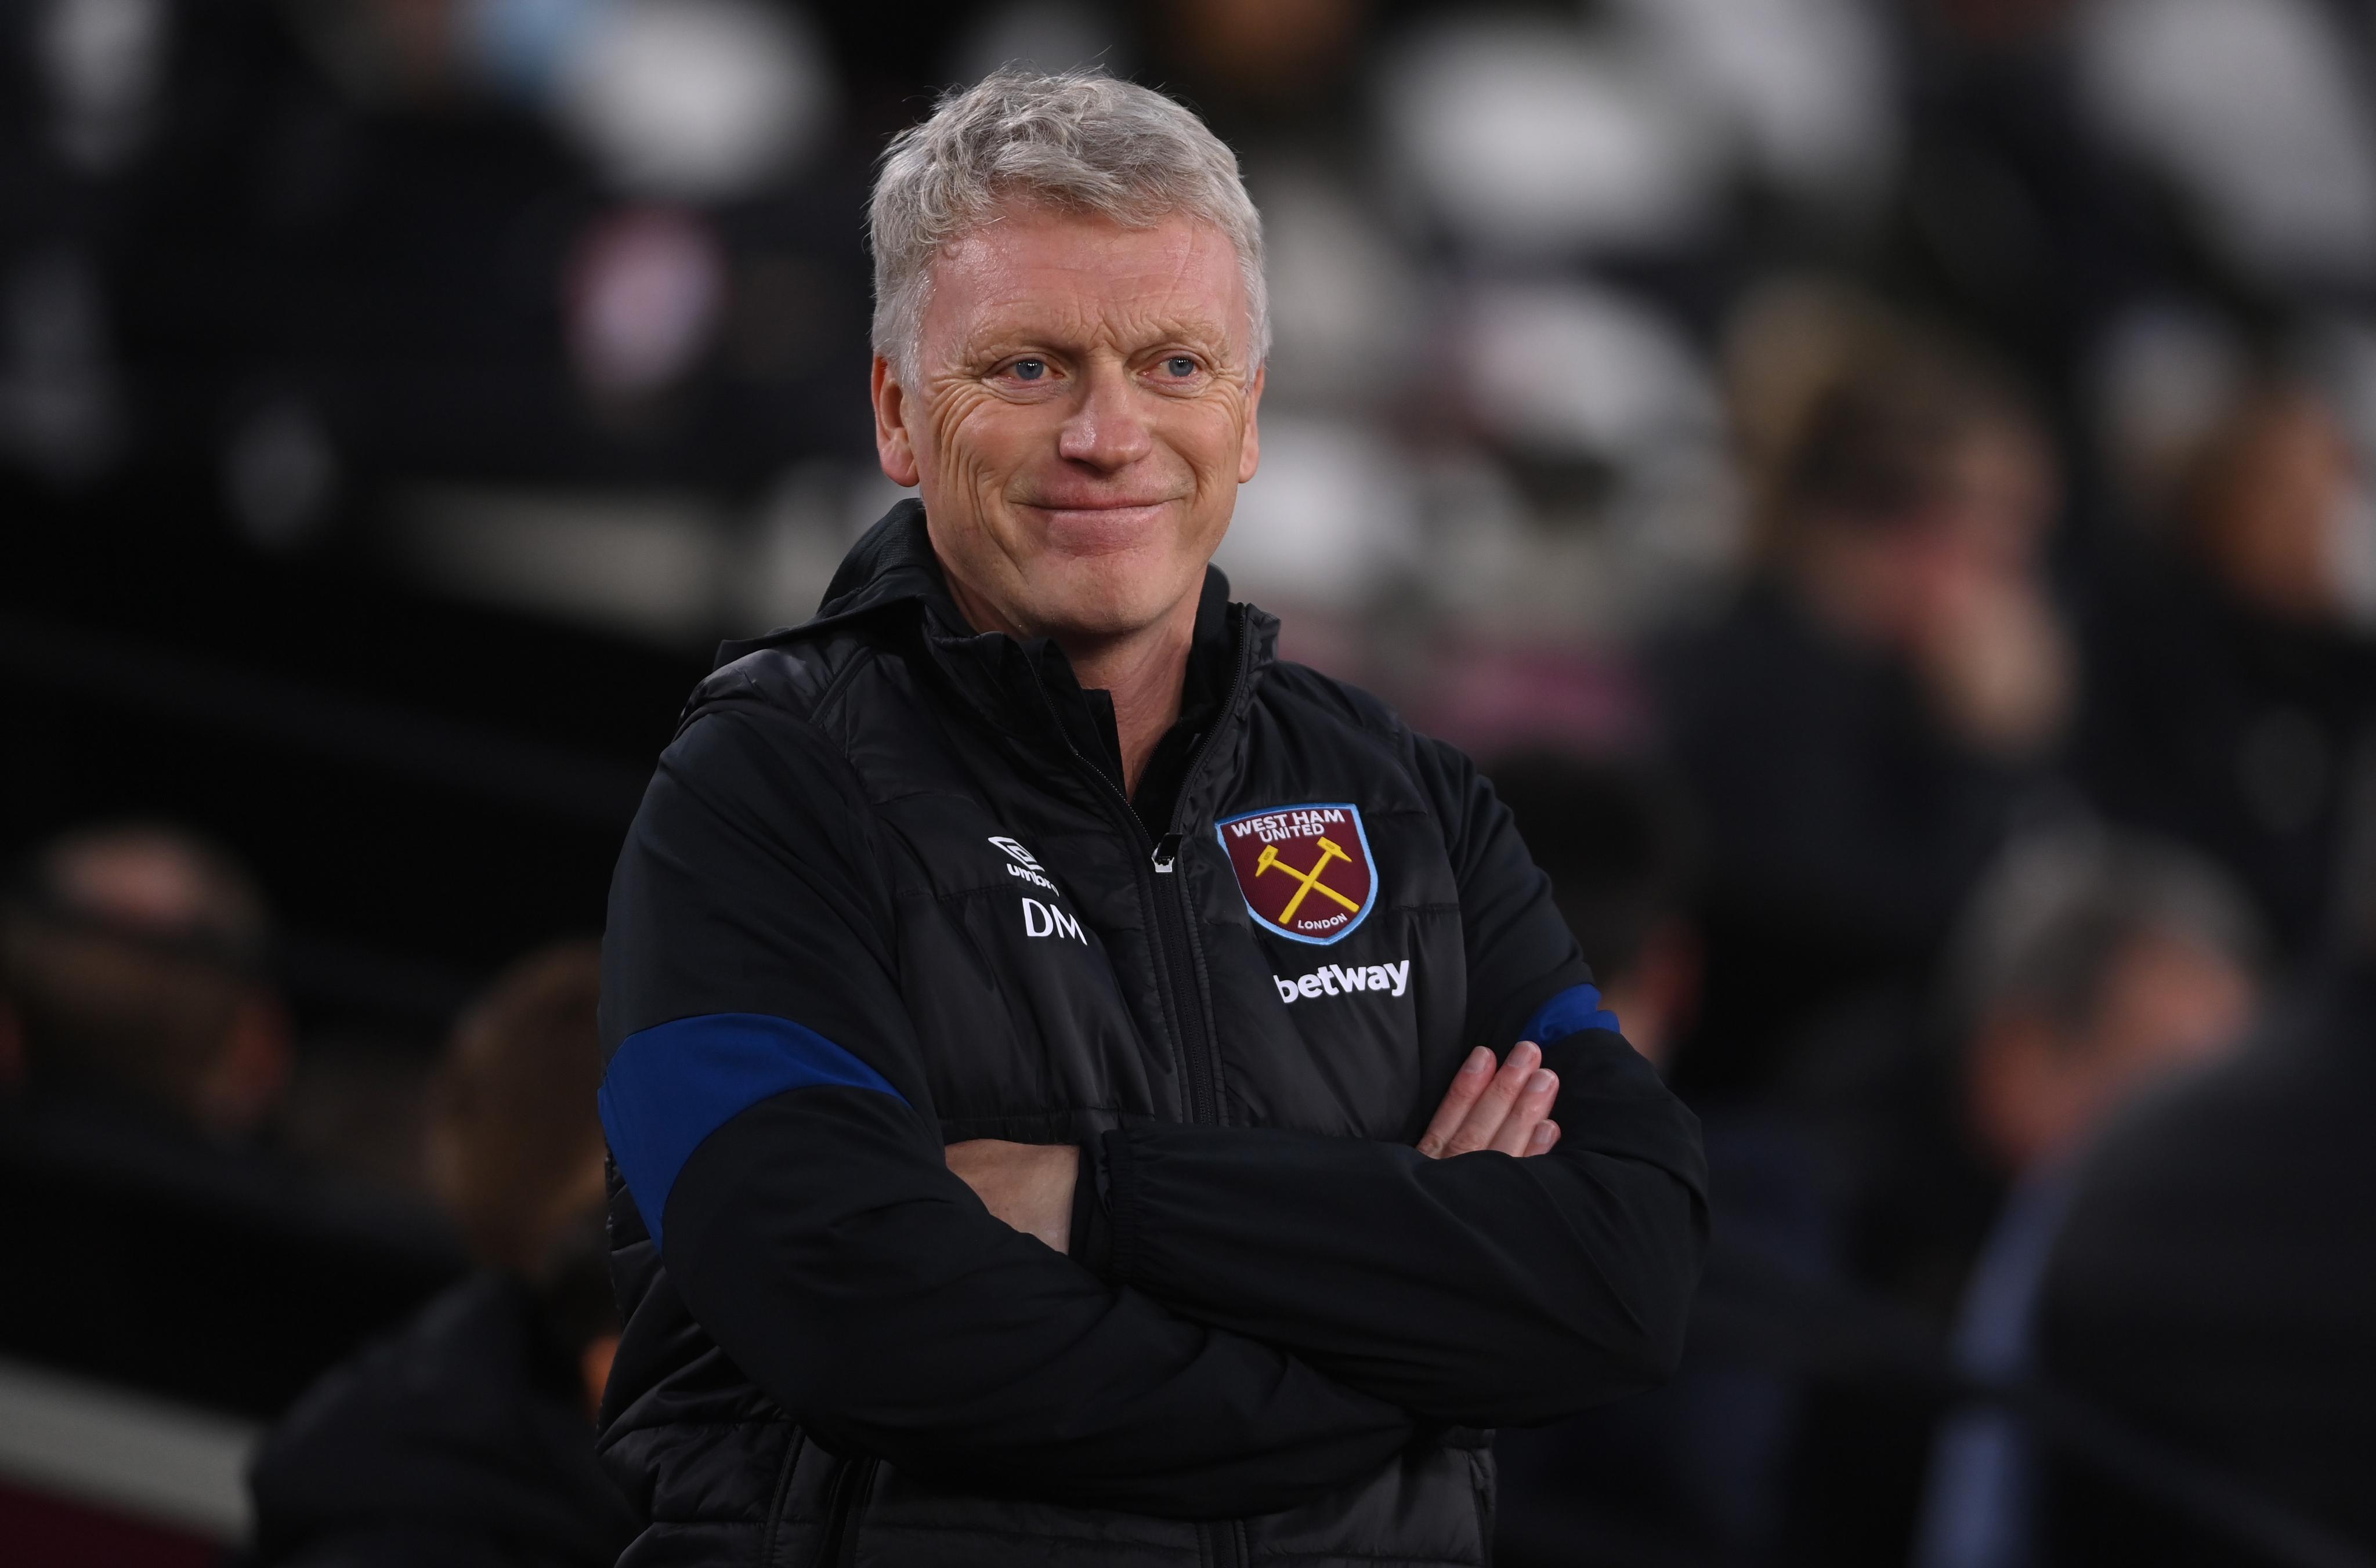 Have had concerns about Michail Antonio’s international trips with Jamaica, claims David Moyes